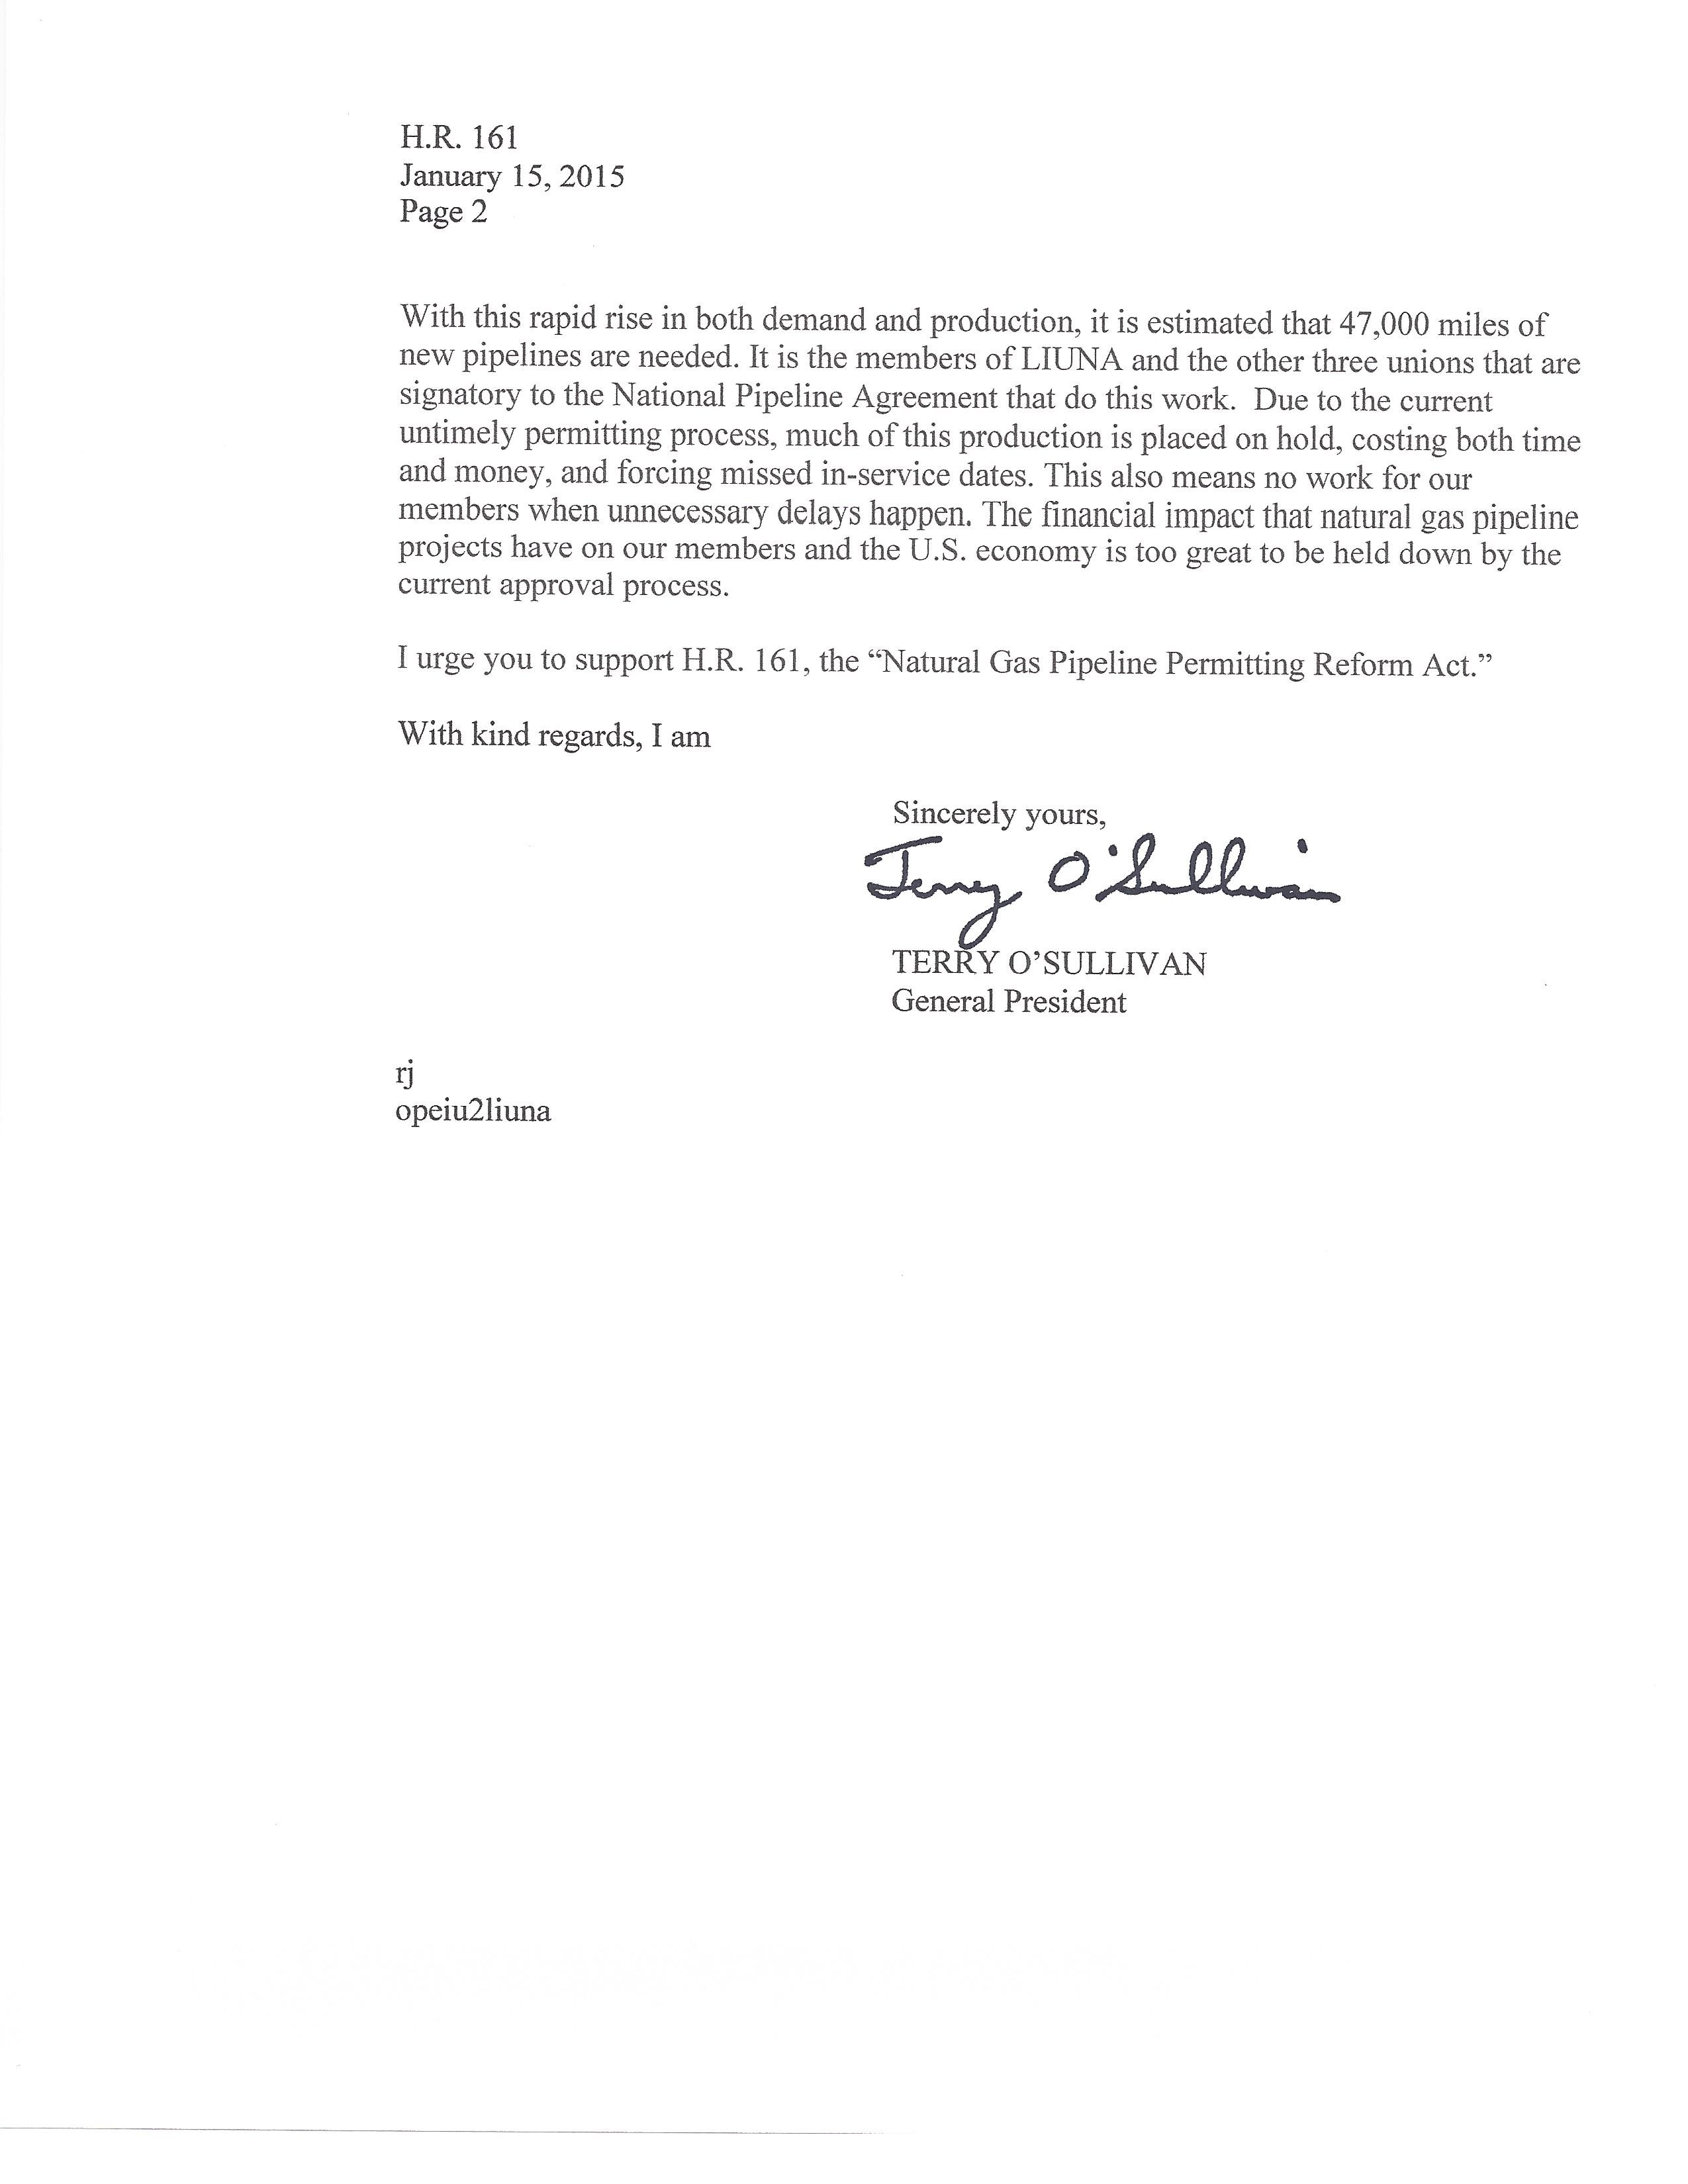 LIUNA Letter in Support H.R. 161--Natural Gas Permitting Reform Act_Page_2.jpg